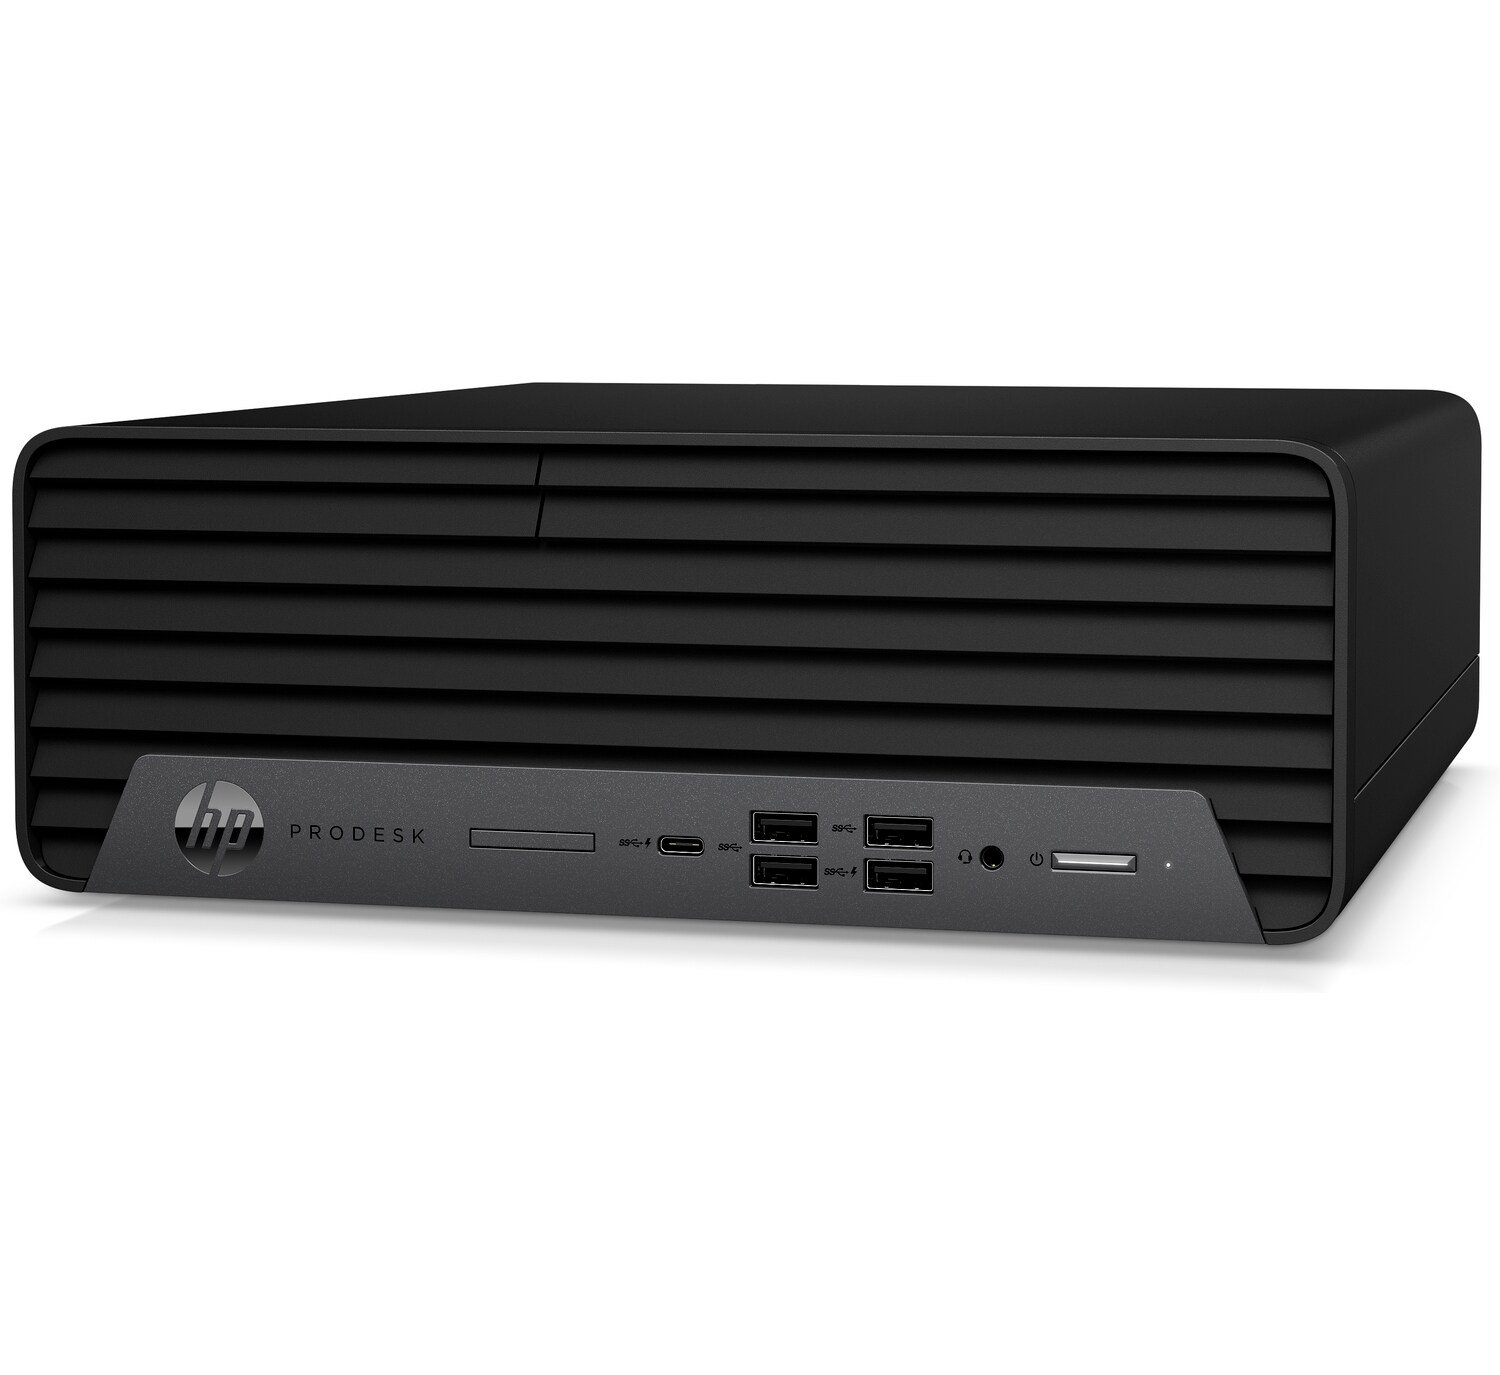 HP ProDesk 600 G6 SFF i7-10700 4.8GHz 16GB RAM 256GB SSD Small Form Factor Desktop with Windows 10 Pro